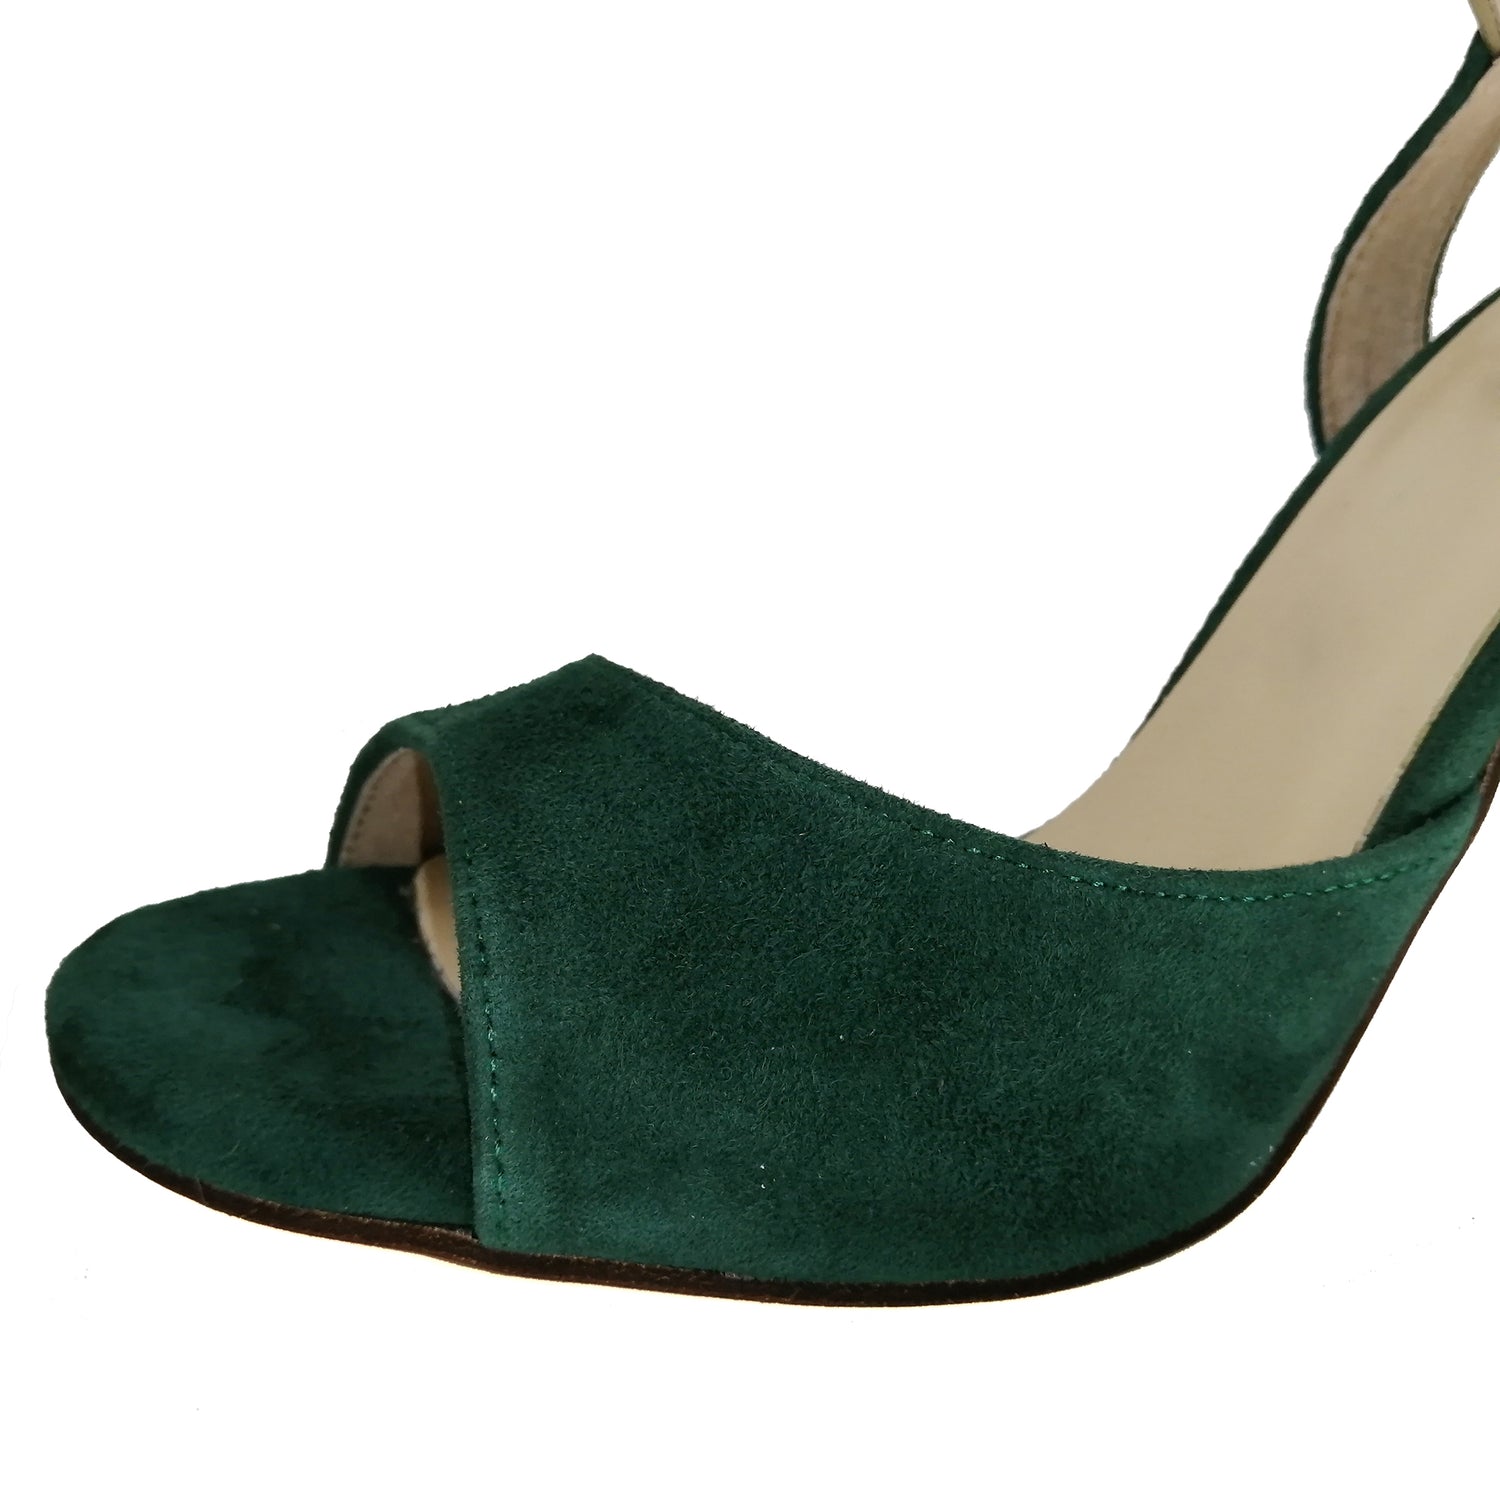 Pro Dancer Argentine Tango Shoes with Leather Sole and Dark Green Heels6